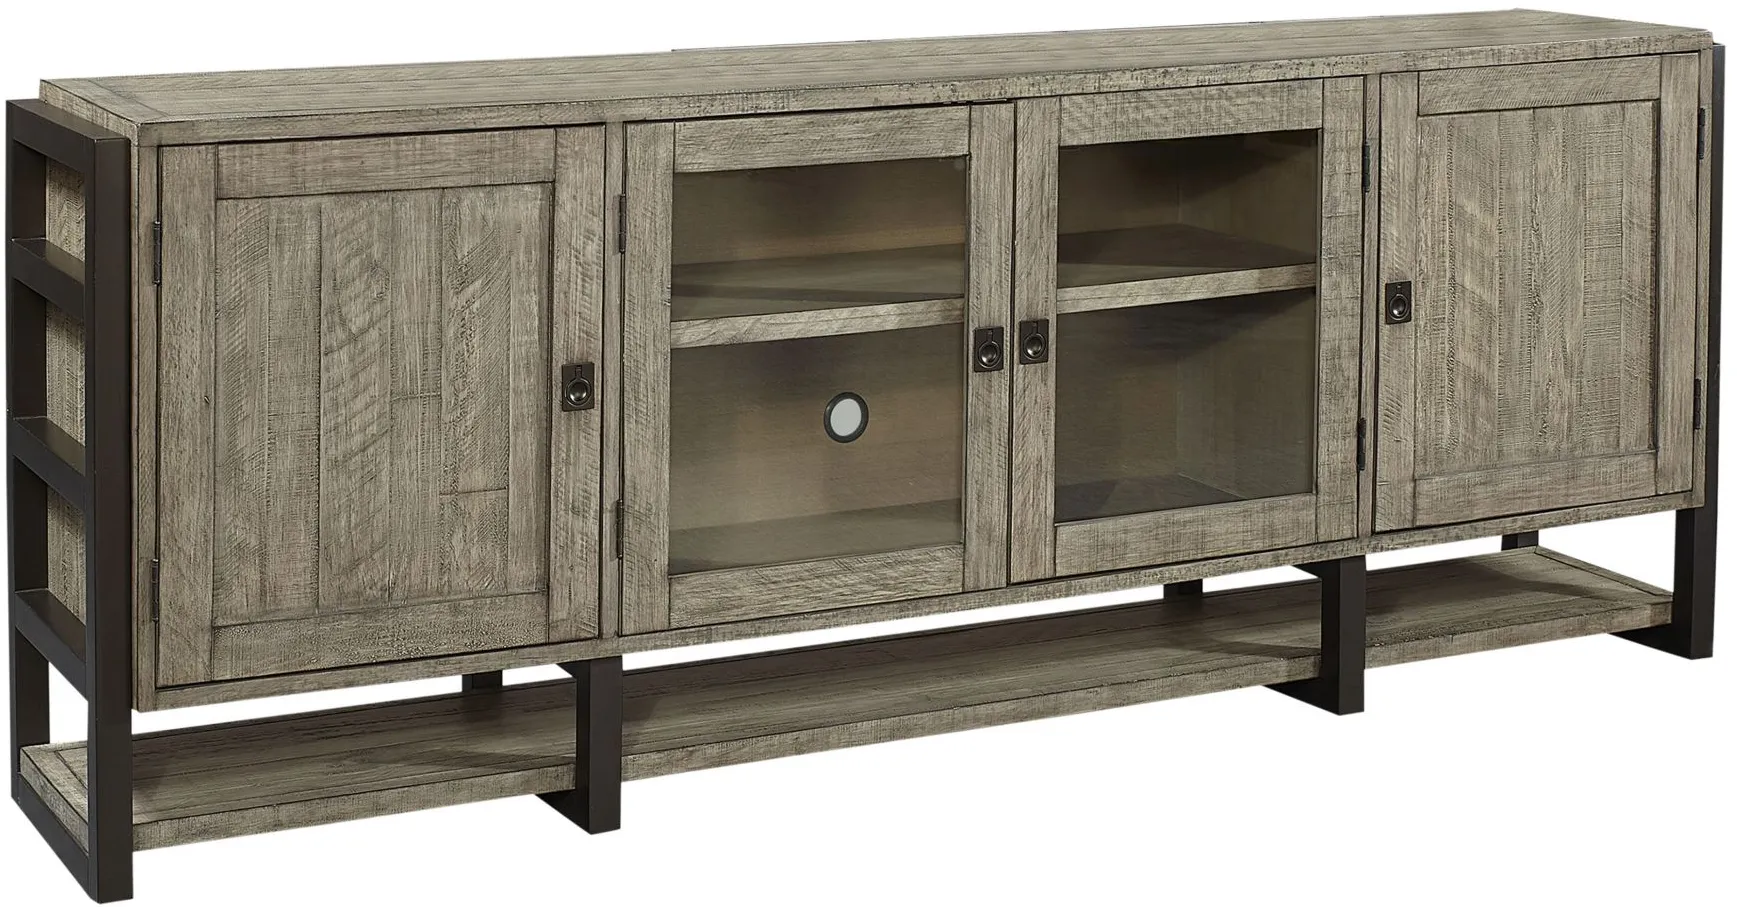 Grayson Console in Cinder Gray by Aspen Home